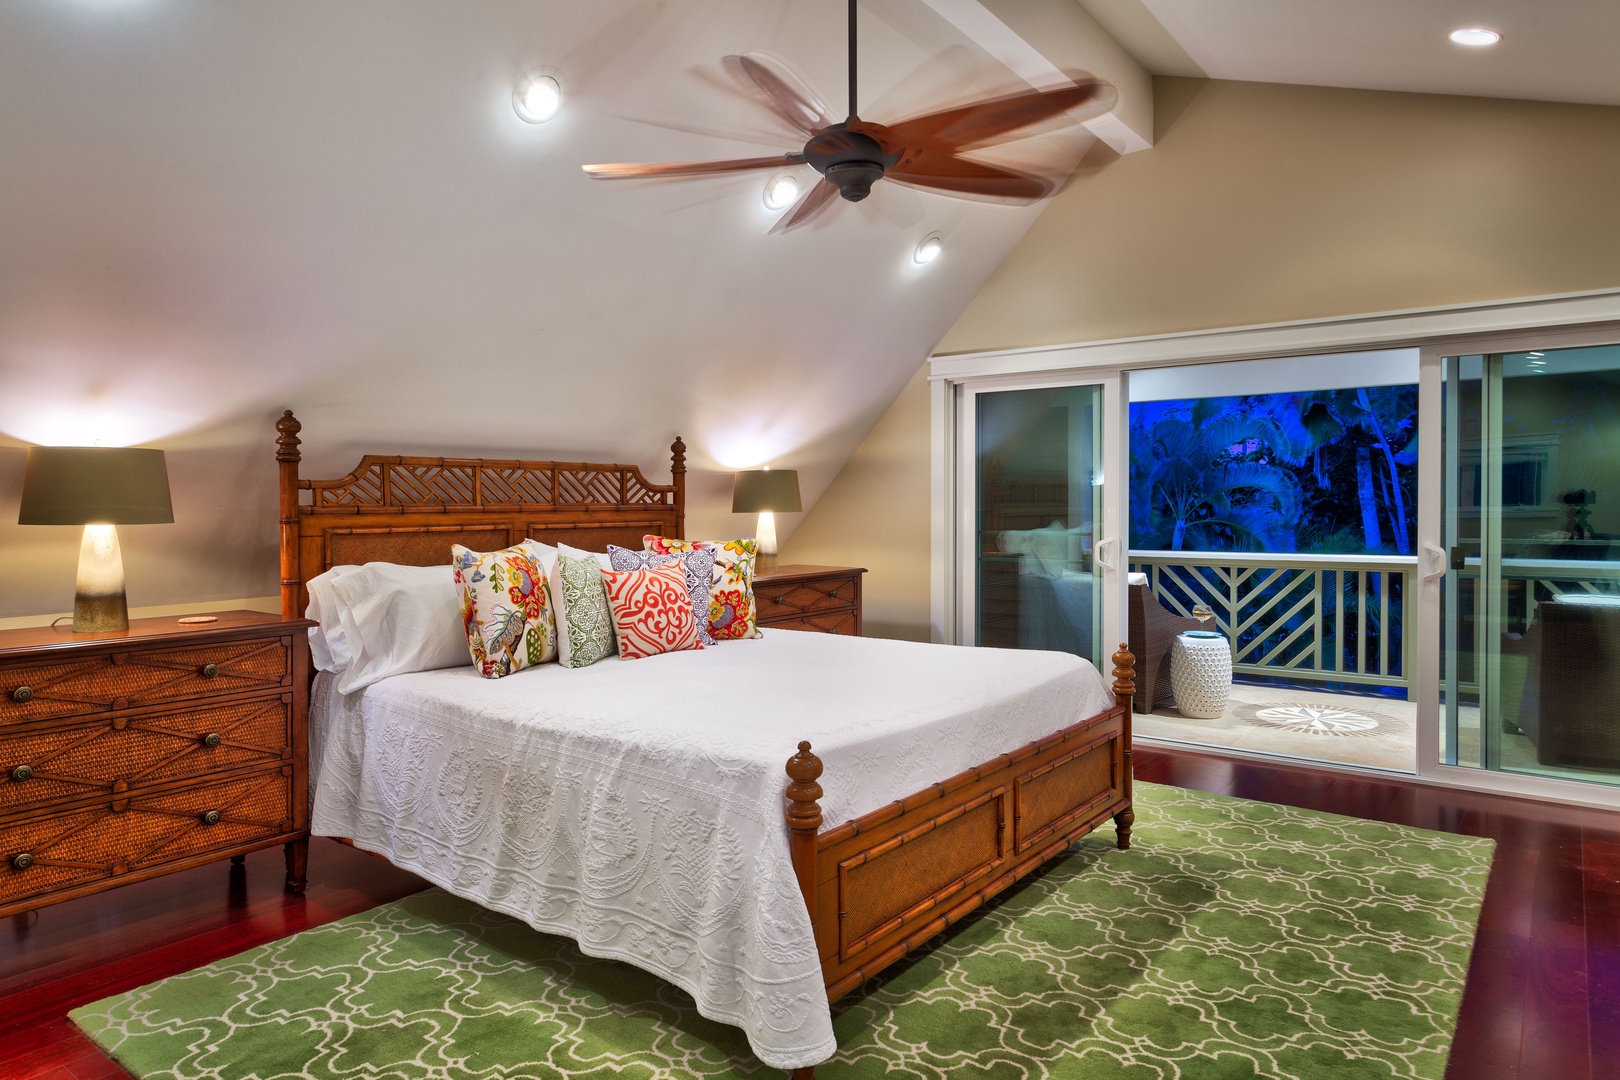 Kailua Vacation Rentals, Maluhia - Upstairs, the primary bedroom comprises an entire half of the villa.